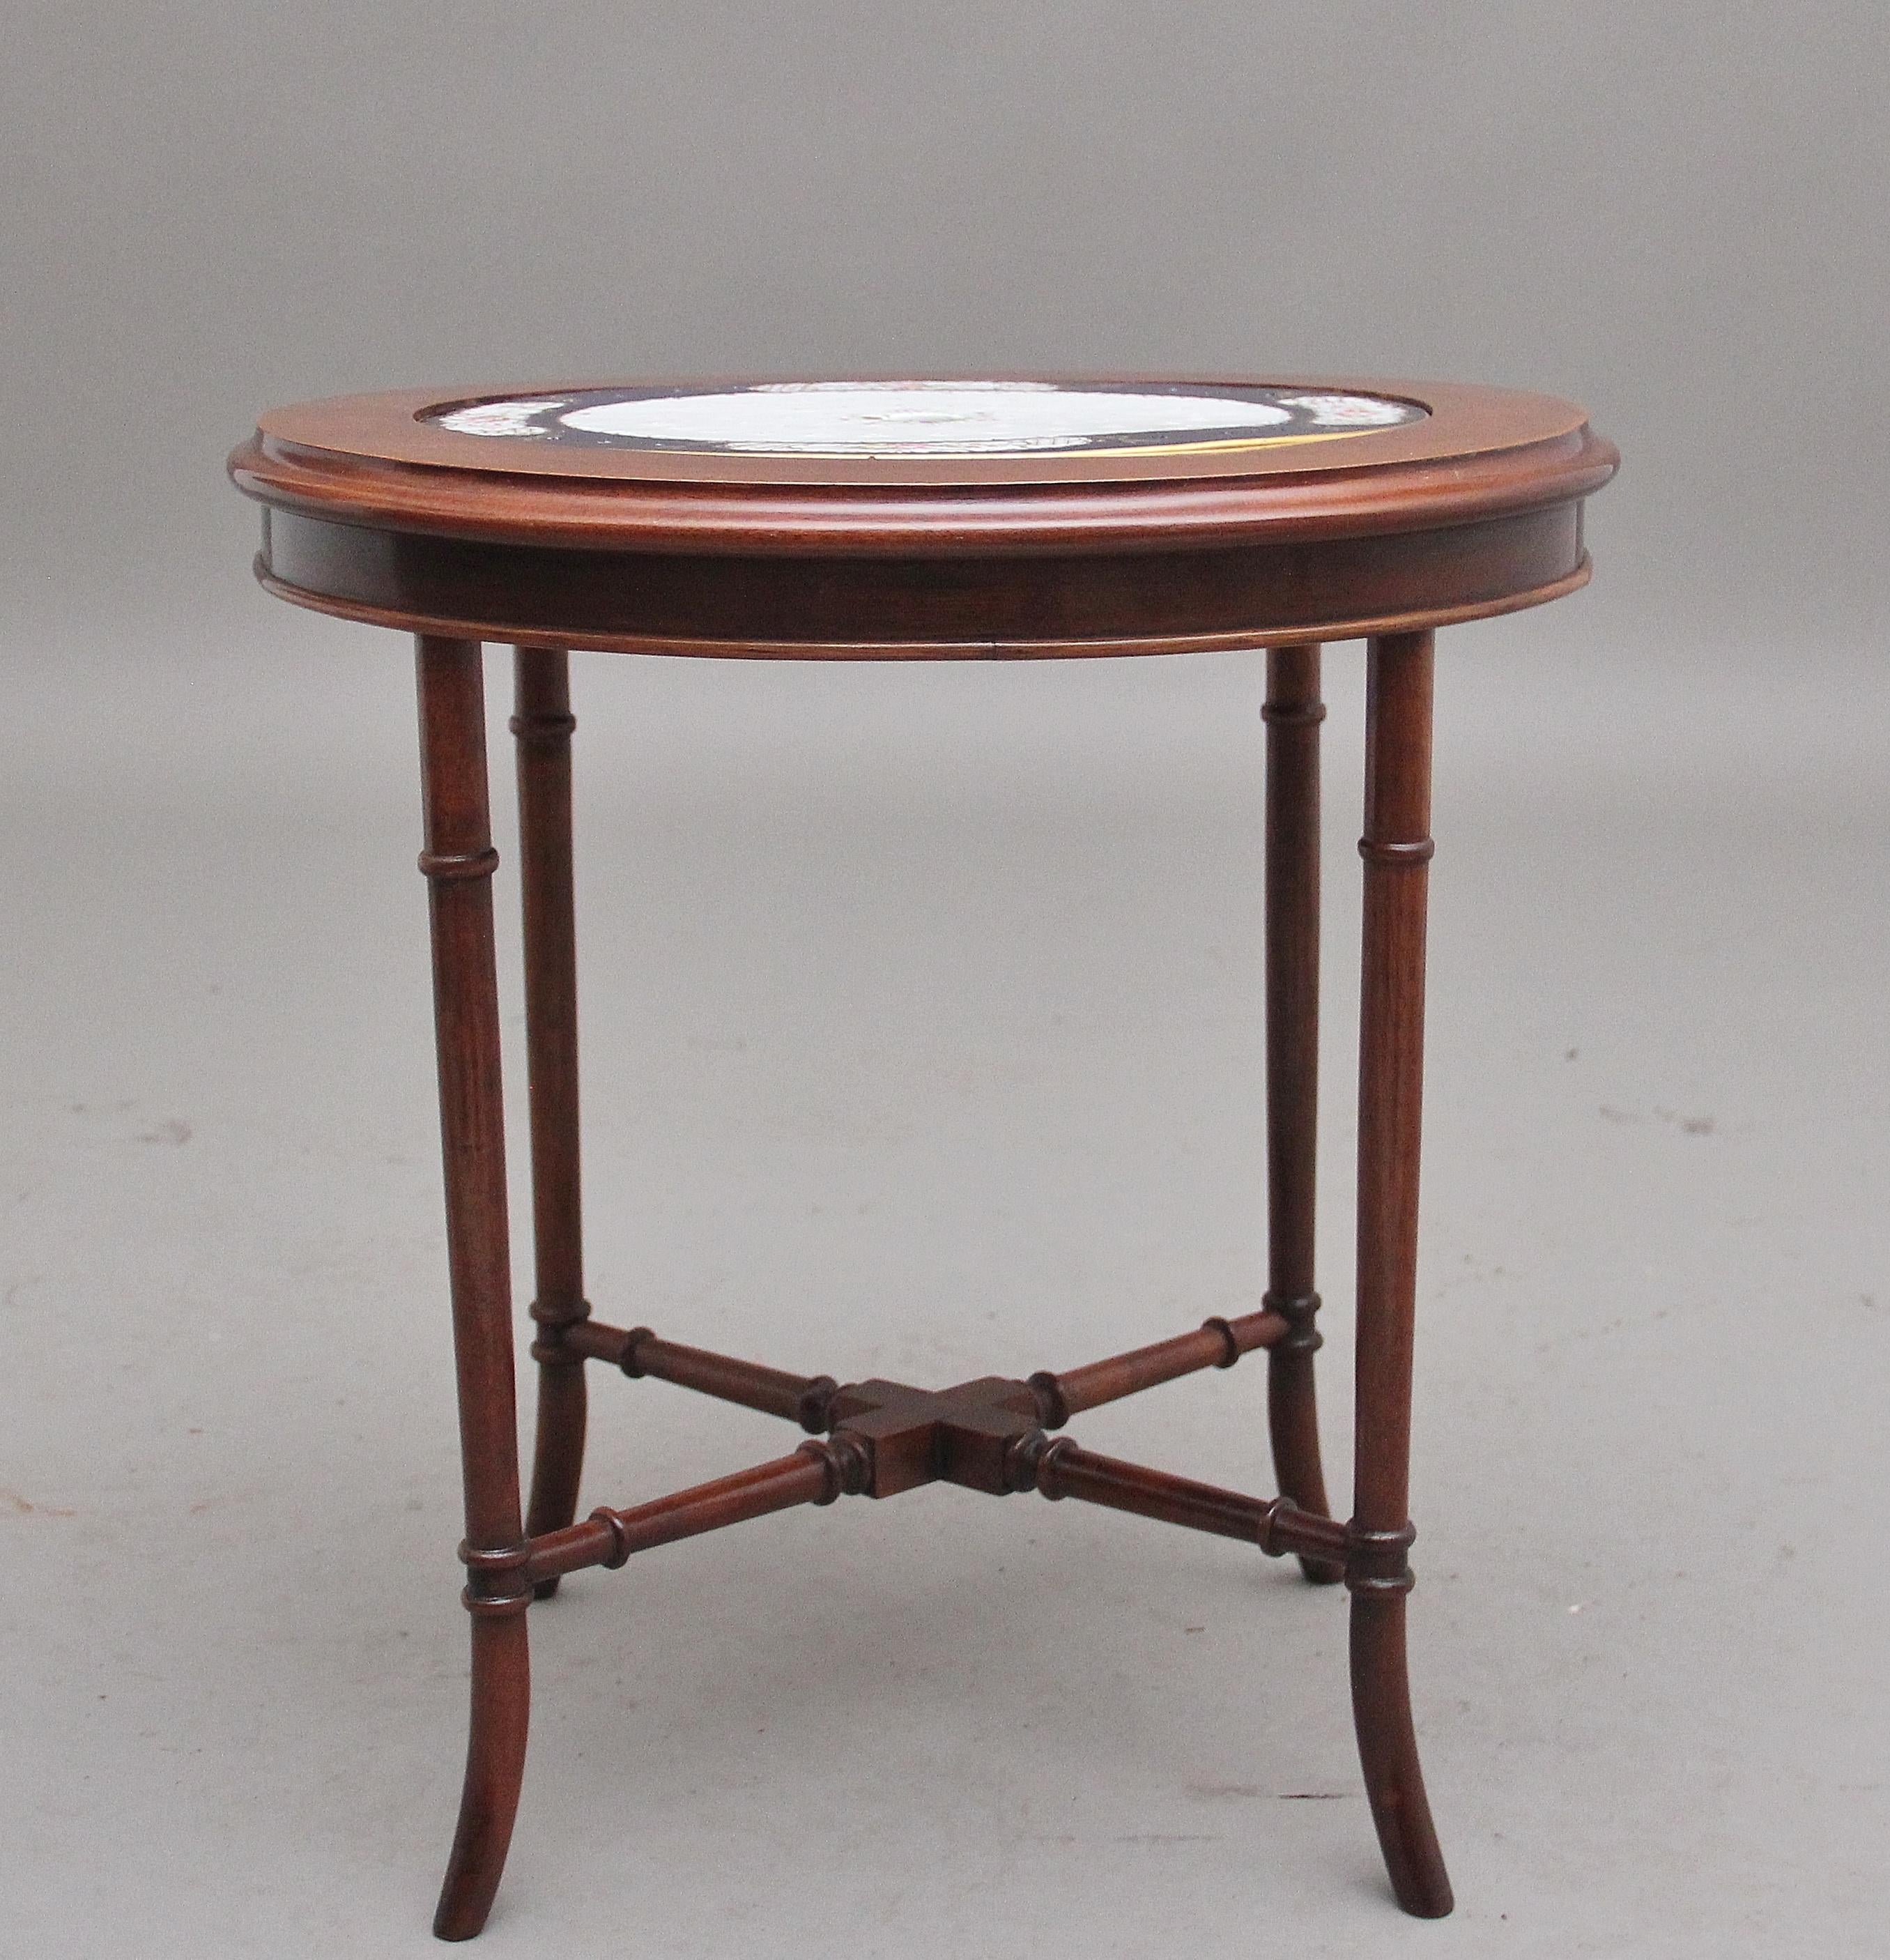 Edwardian Early 20th Century Mahogany Occasional Table with a Ceramic Inset